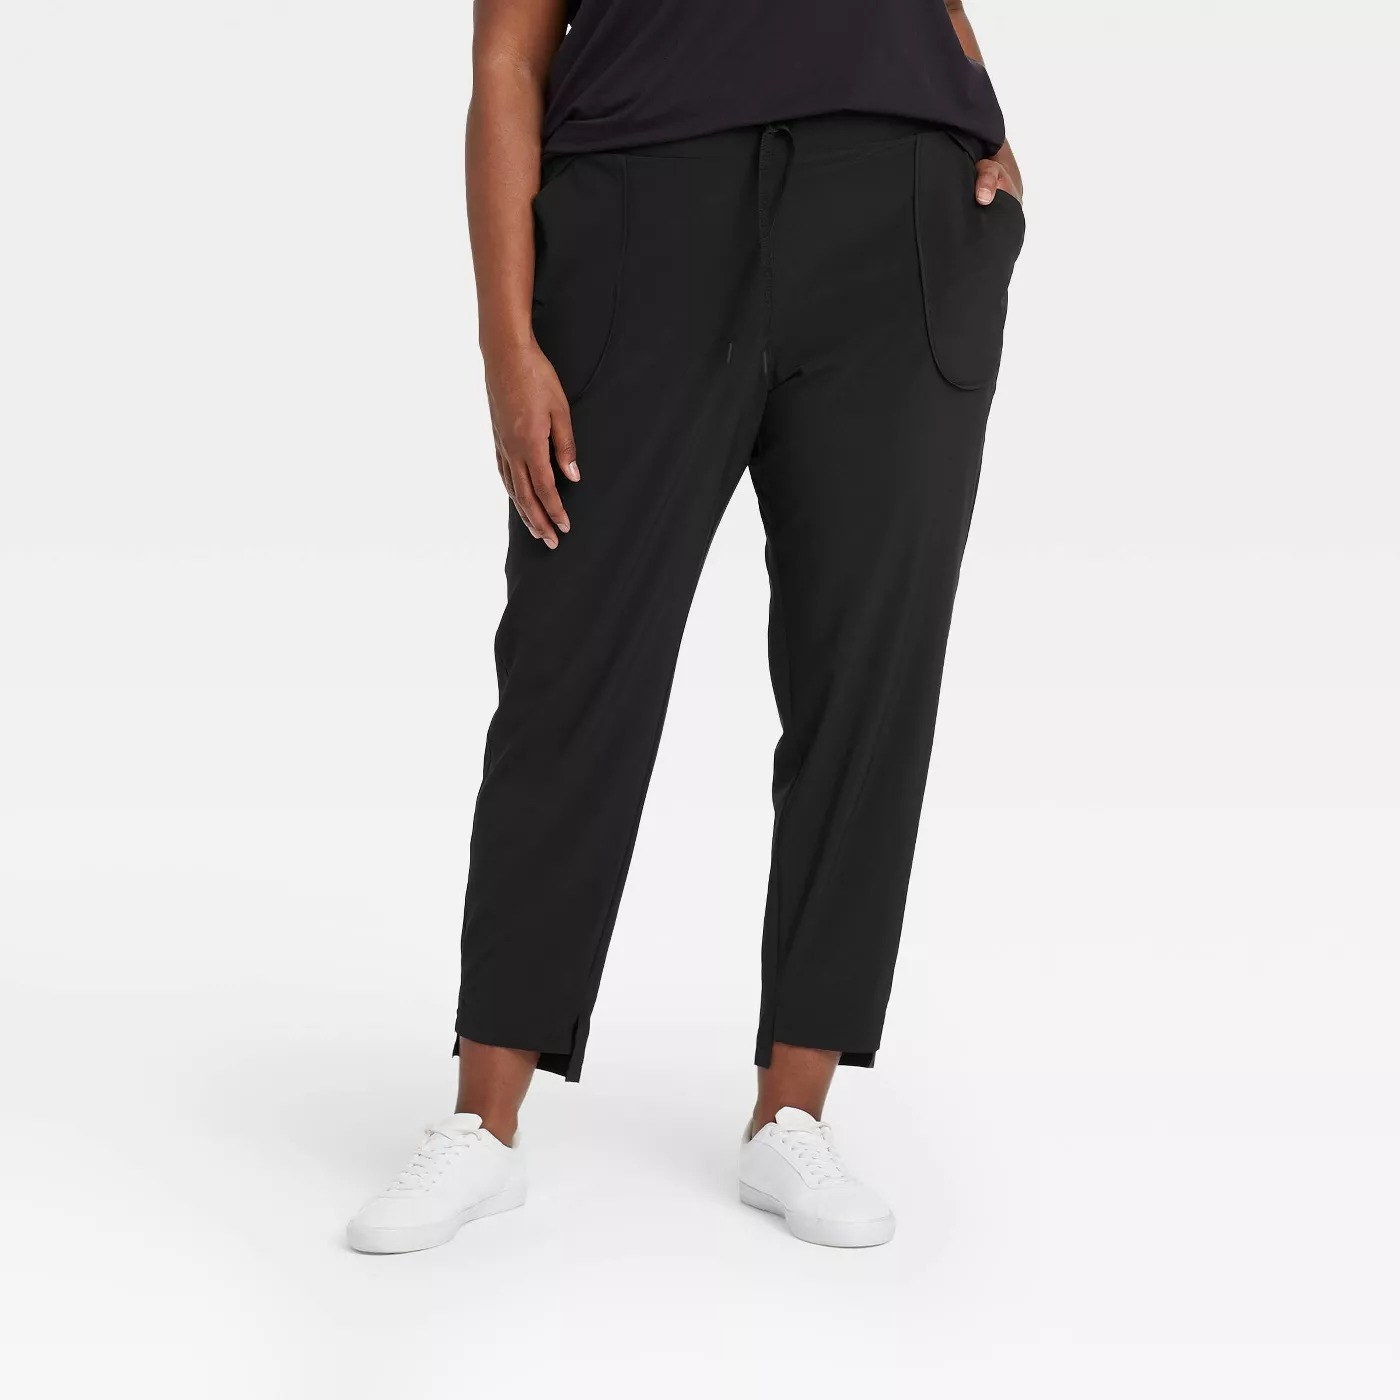 Model wearing loose black pants with side pockets, stop at the ankle